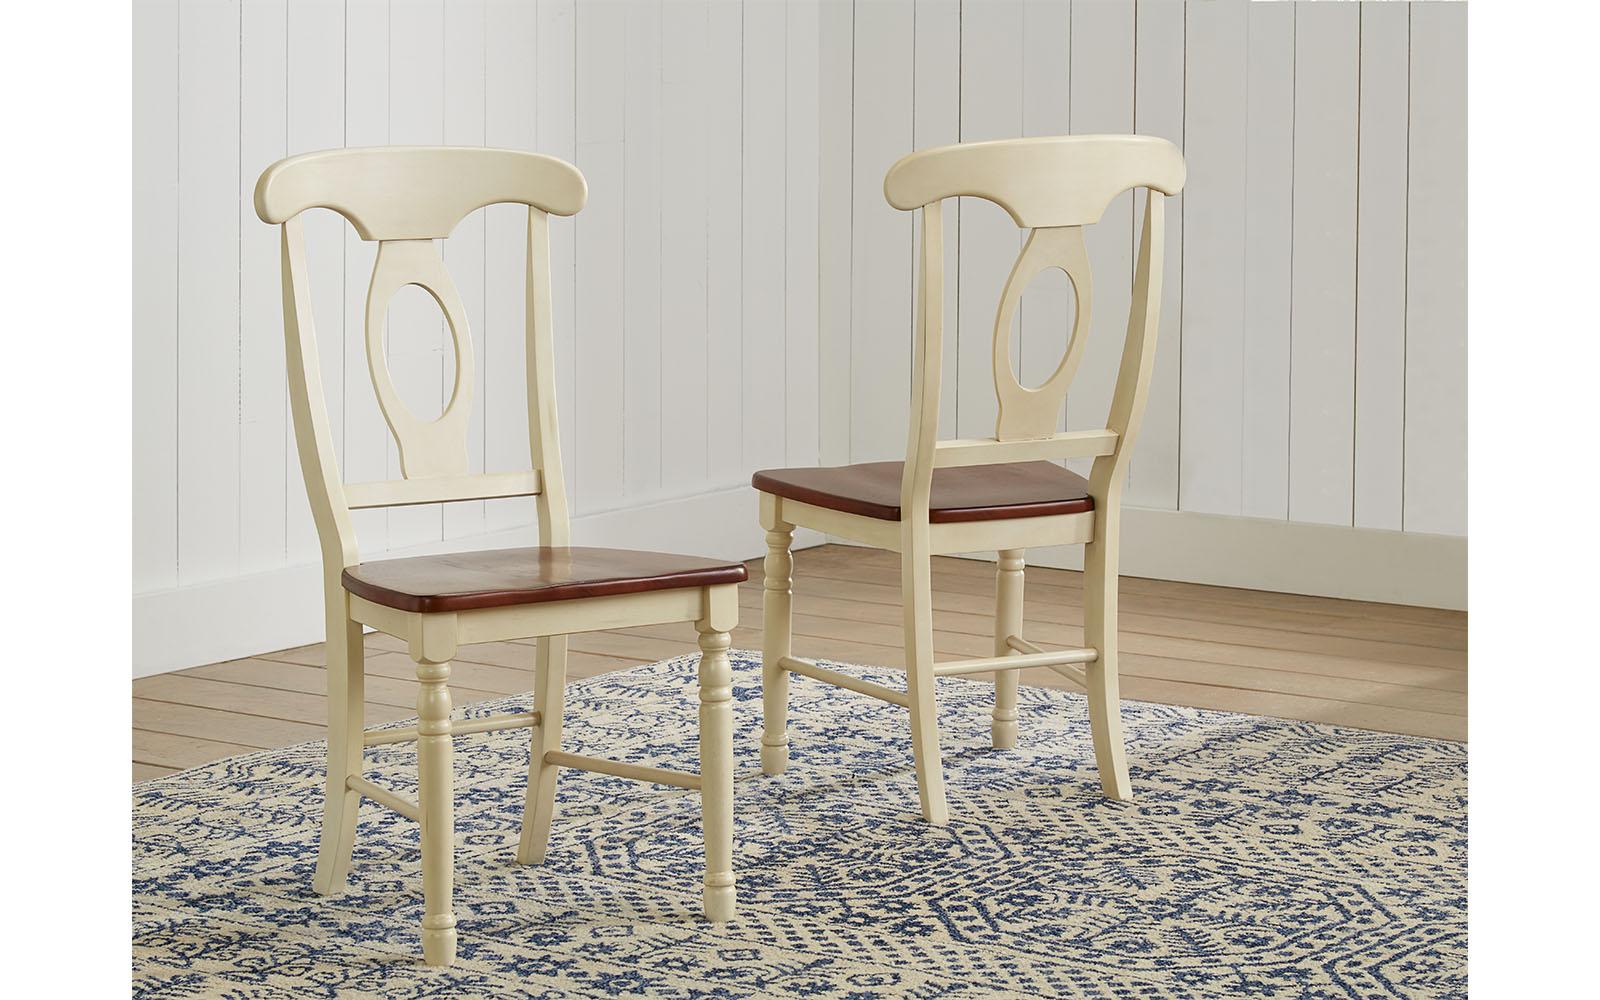 Rustic Dining Side Chair British Isles CO BRICO285K-Set-2 in Brown, White 